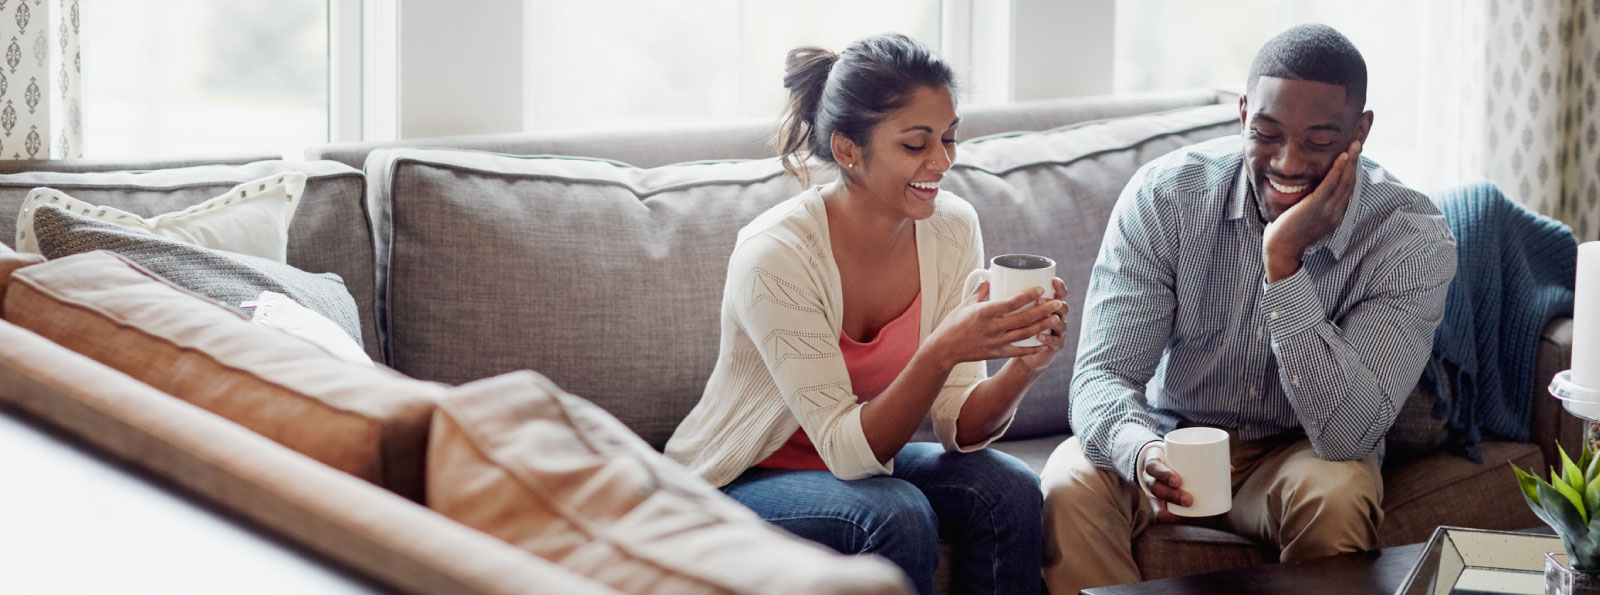 Couple sitting on couch drinking coffee and smiling at each other.